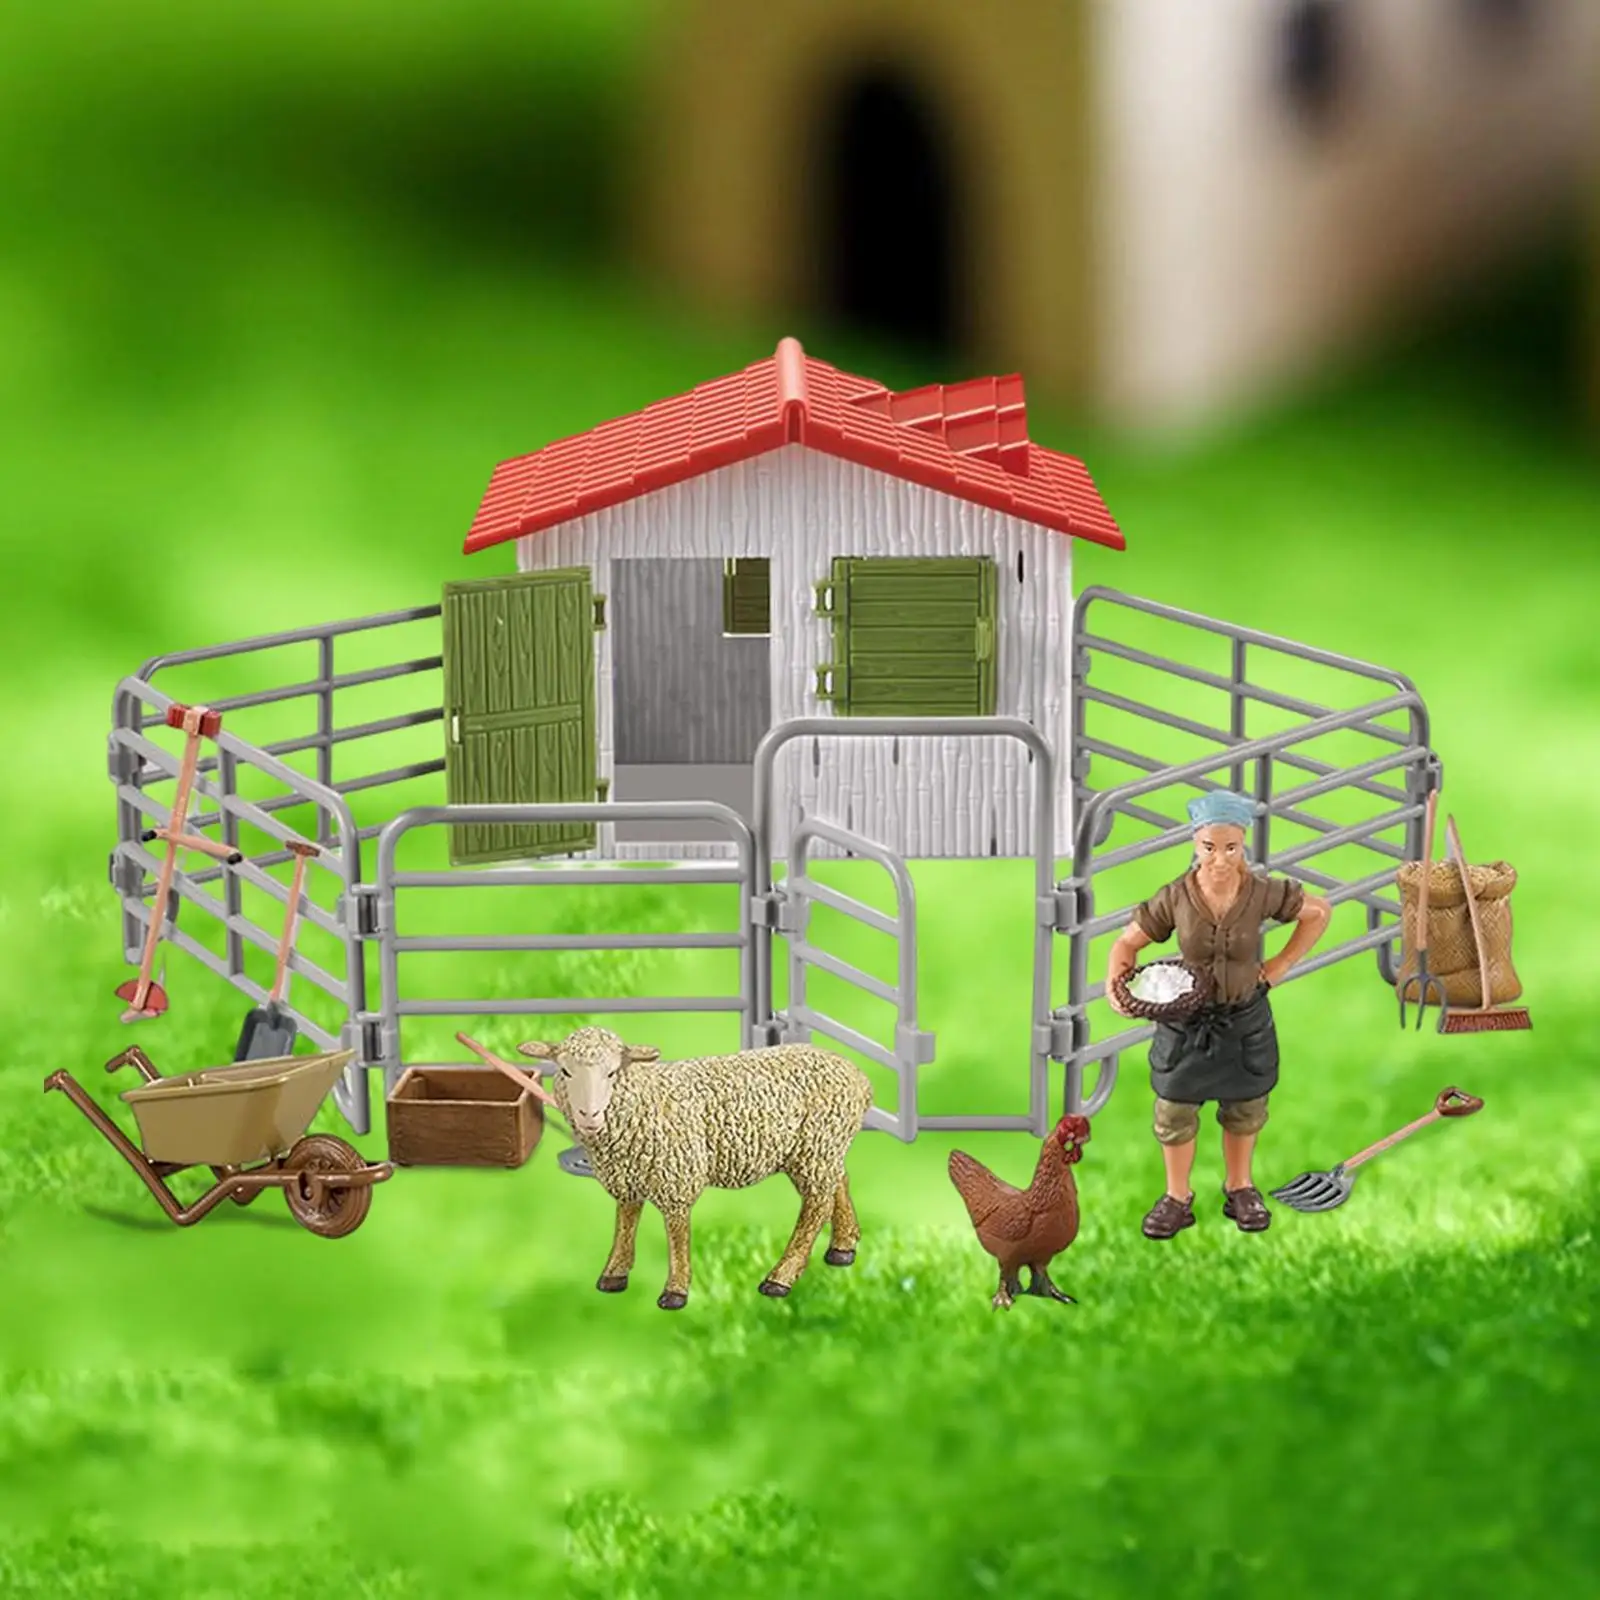 Educational Kid Farm Figurines Tools Fences Playset Easily Clean and Washable Detailed Appearance for Boys Girls Realistic Cute